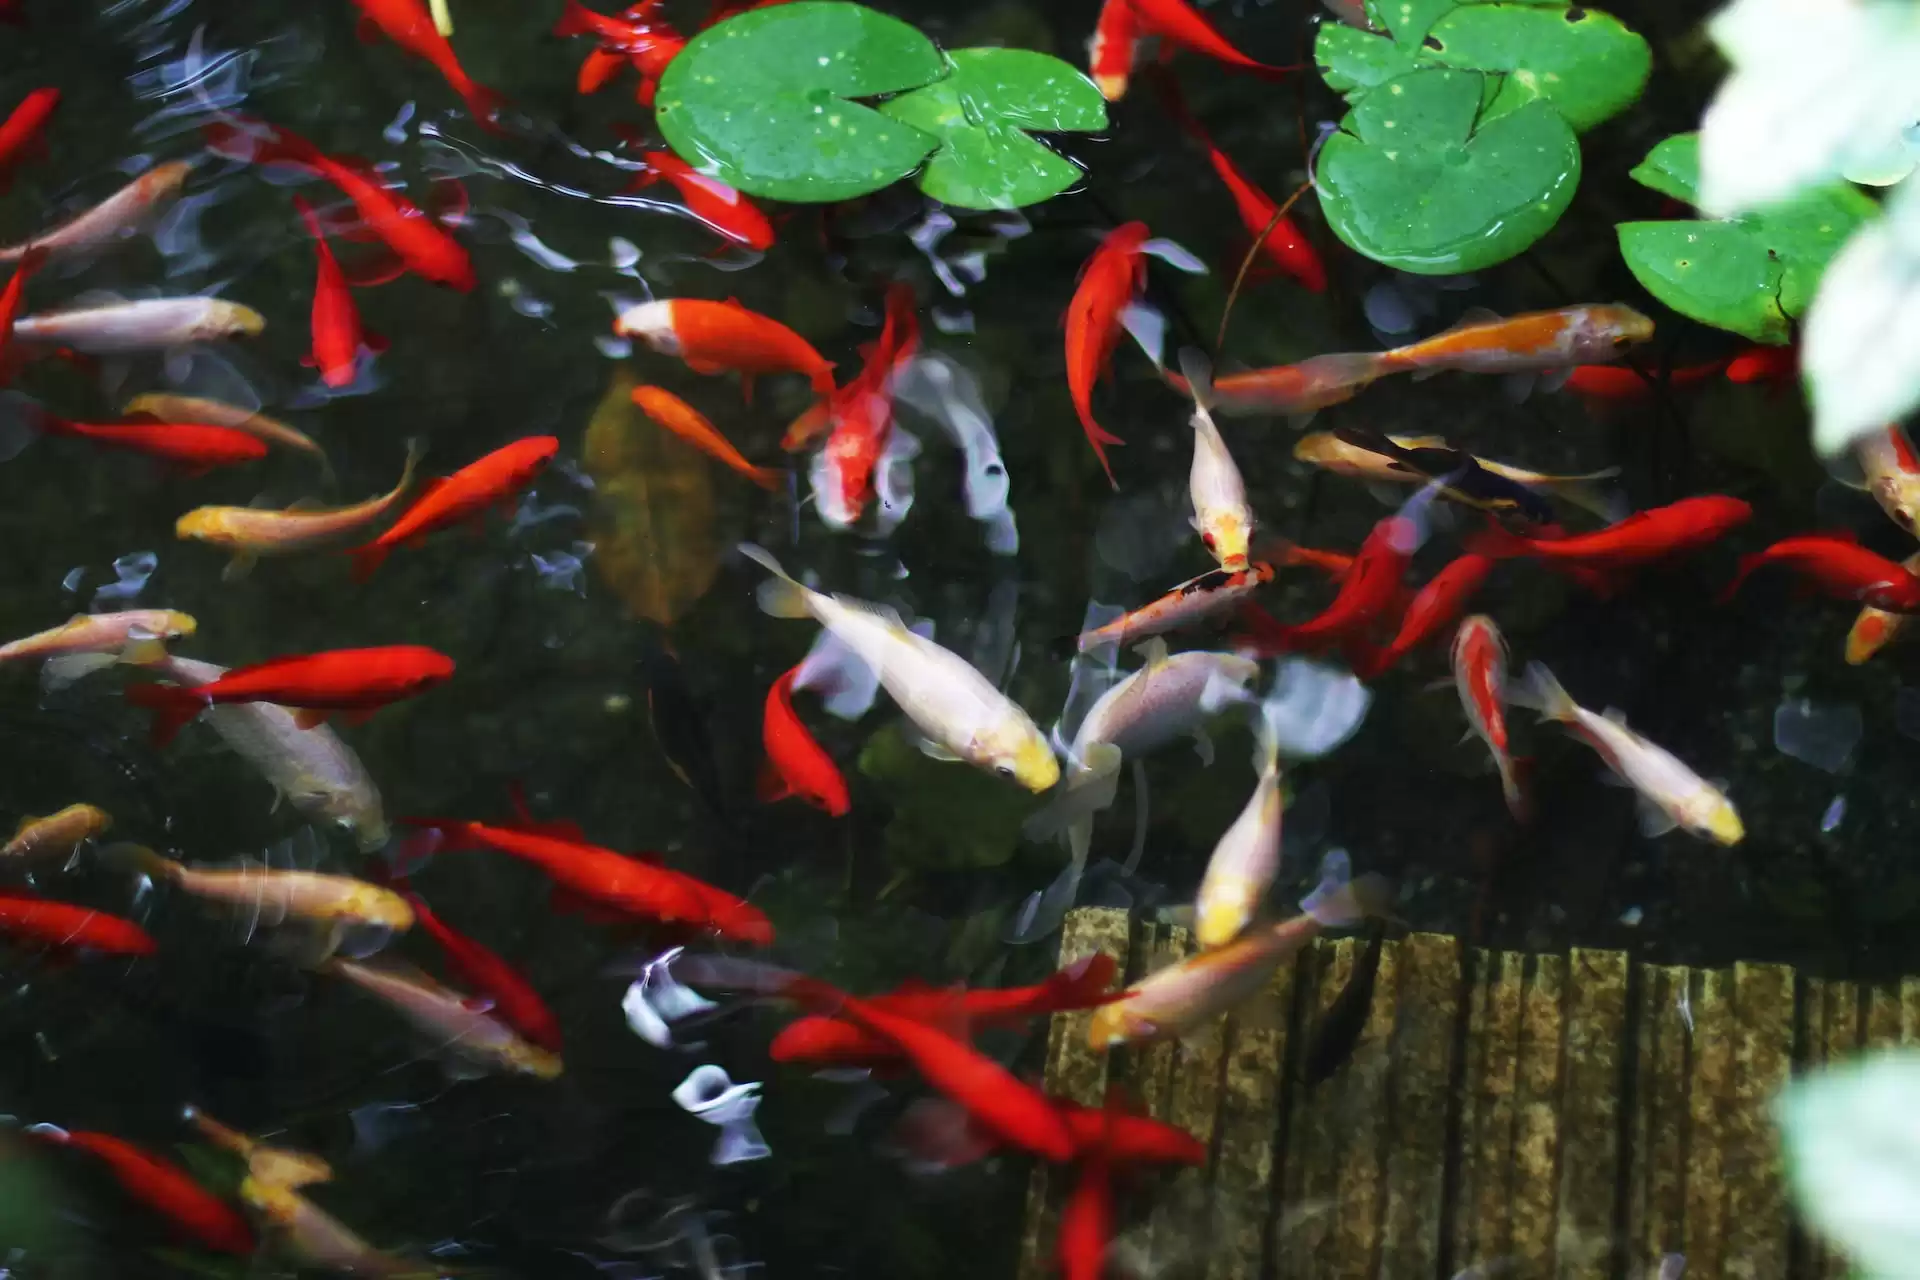 Fish swimming in a clean pond